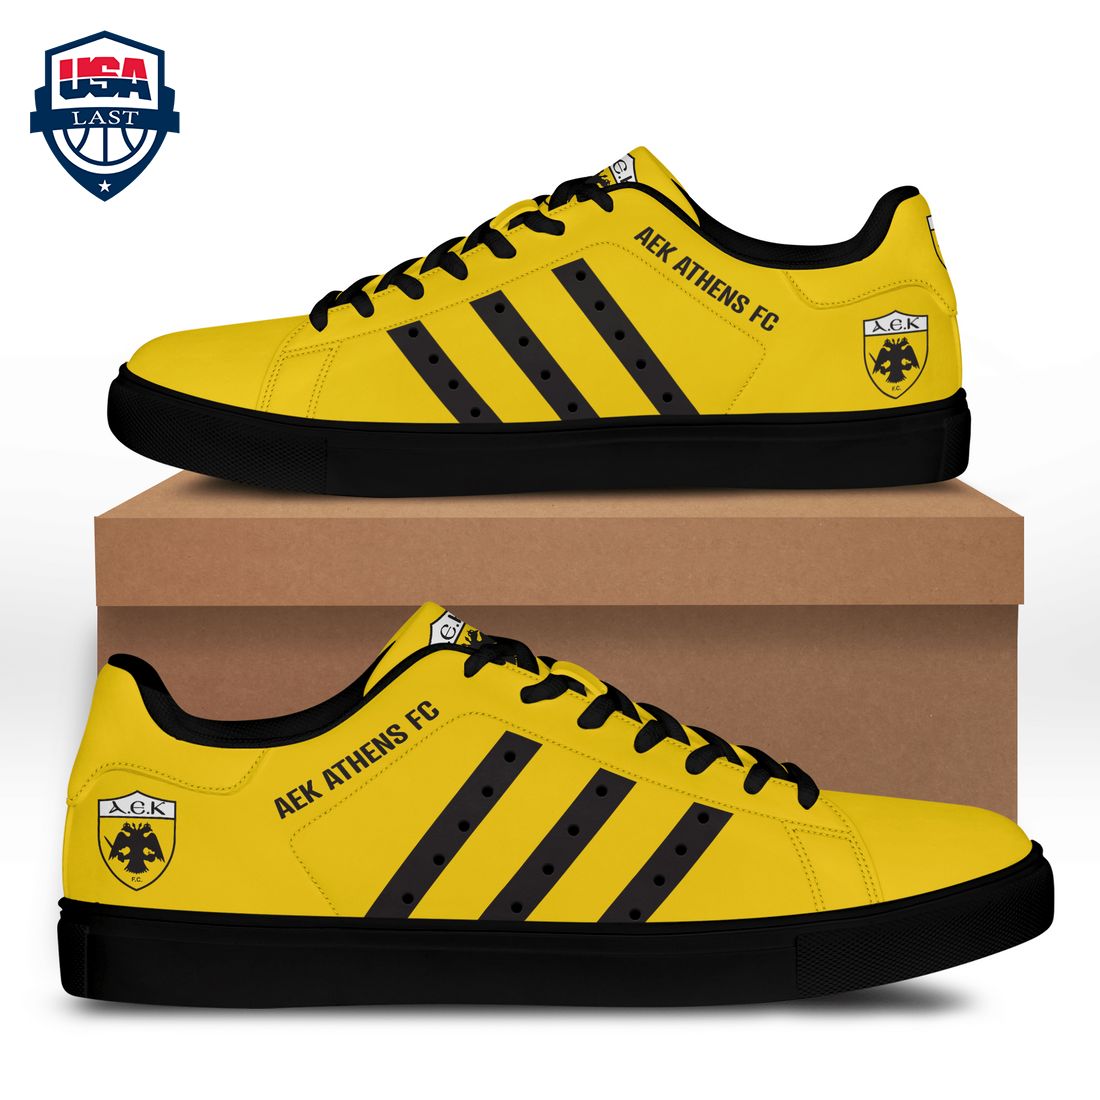 aek-athens-fc-grey-stripes-style-1-stan-smith-low-top-shoes-1-GKl8y.jpg